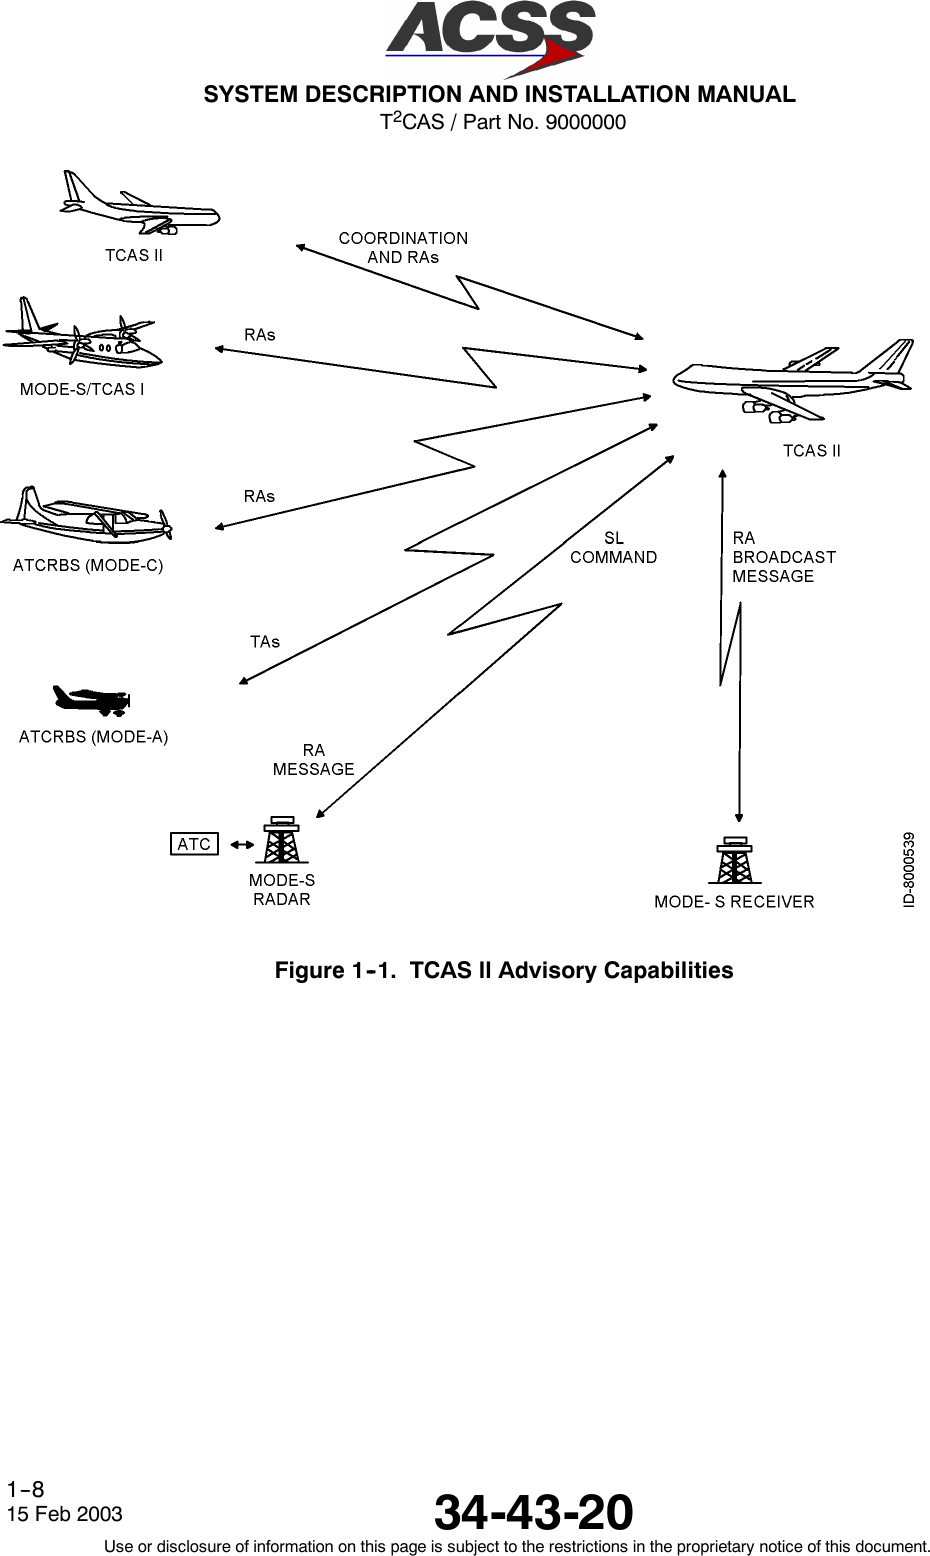 T2CAS / Part No. 9000000SYSTEM DESCRIPTION AND INSTALLATION MANUAL34-43-2015 Feb 2003Use or disclosure of information on this page is subject to the restrictions in the proprietary notice of this document.1--8Figure 1--1. TCAS ll Advisory Capabilities